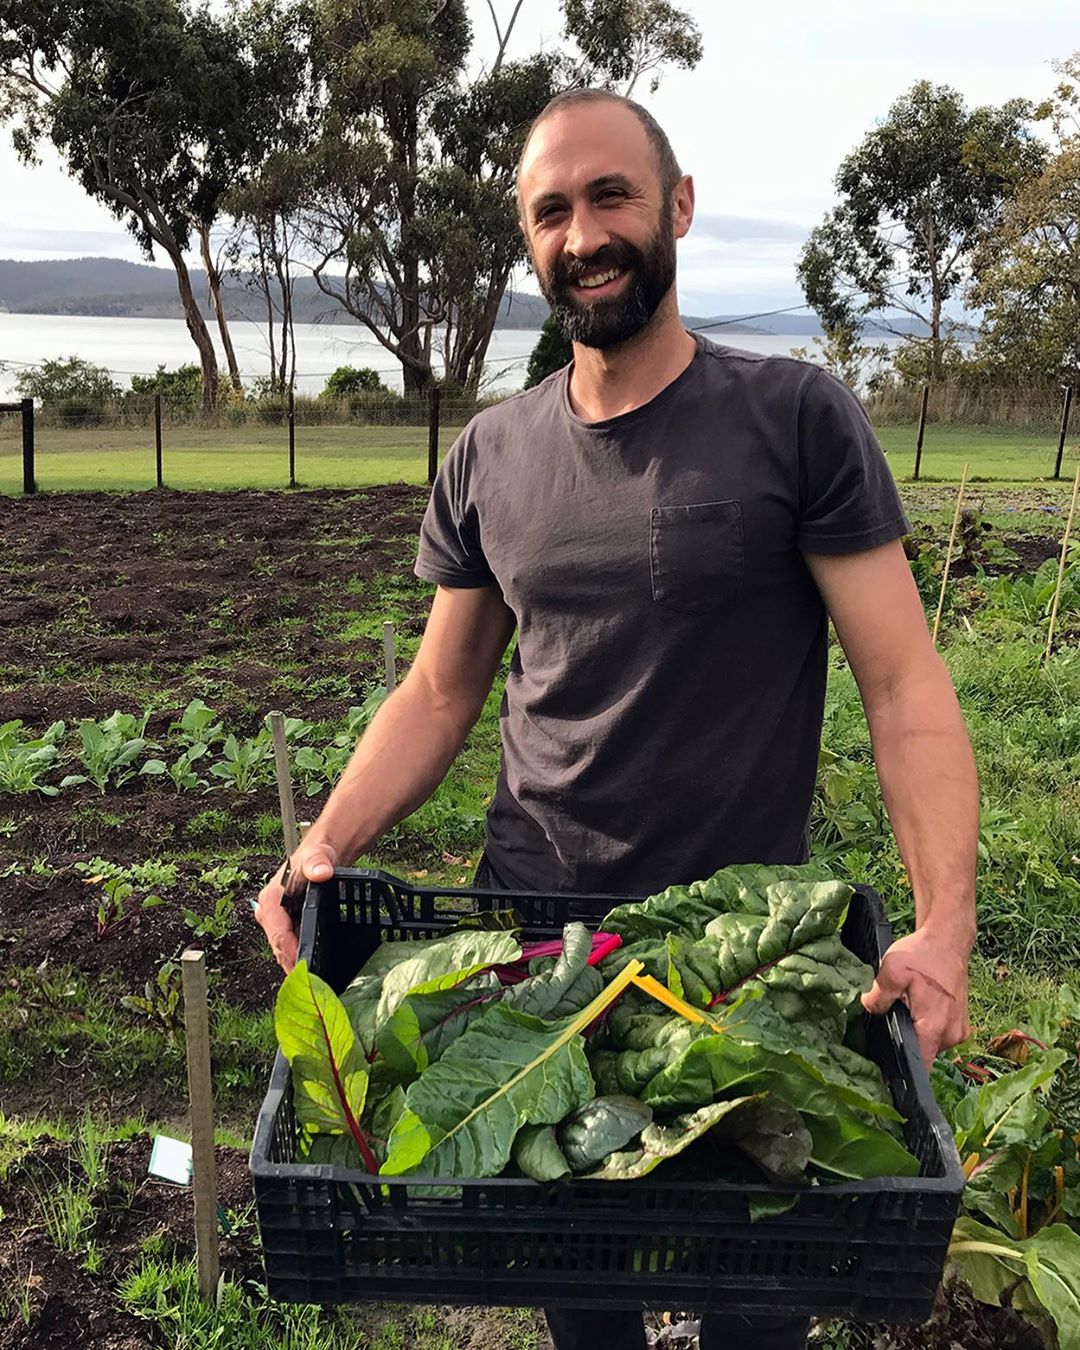 Head Chef Toby Annear is out in the garden putting the final touches on the menu for our Hughes and Hughes lunch. What will be ready to harvest in just a few weeks time? Book your ticket and come along to lunch on the 7th July to find out.  www.peppermintbay.com.au/events  #local #peppermintbayhotel #longtable #lunch #fresh #tasmania #wineanddine #produce #chef #gardentoplate #organic #greenthumb